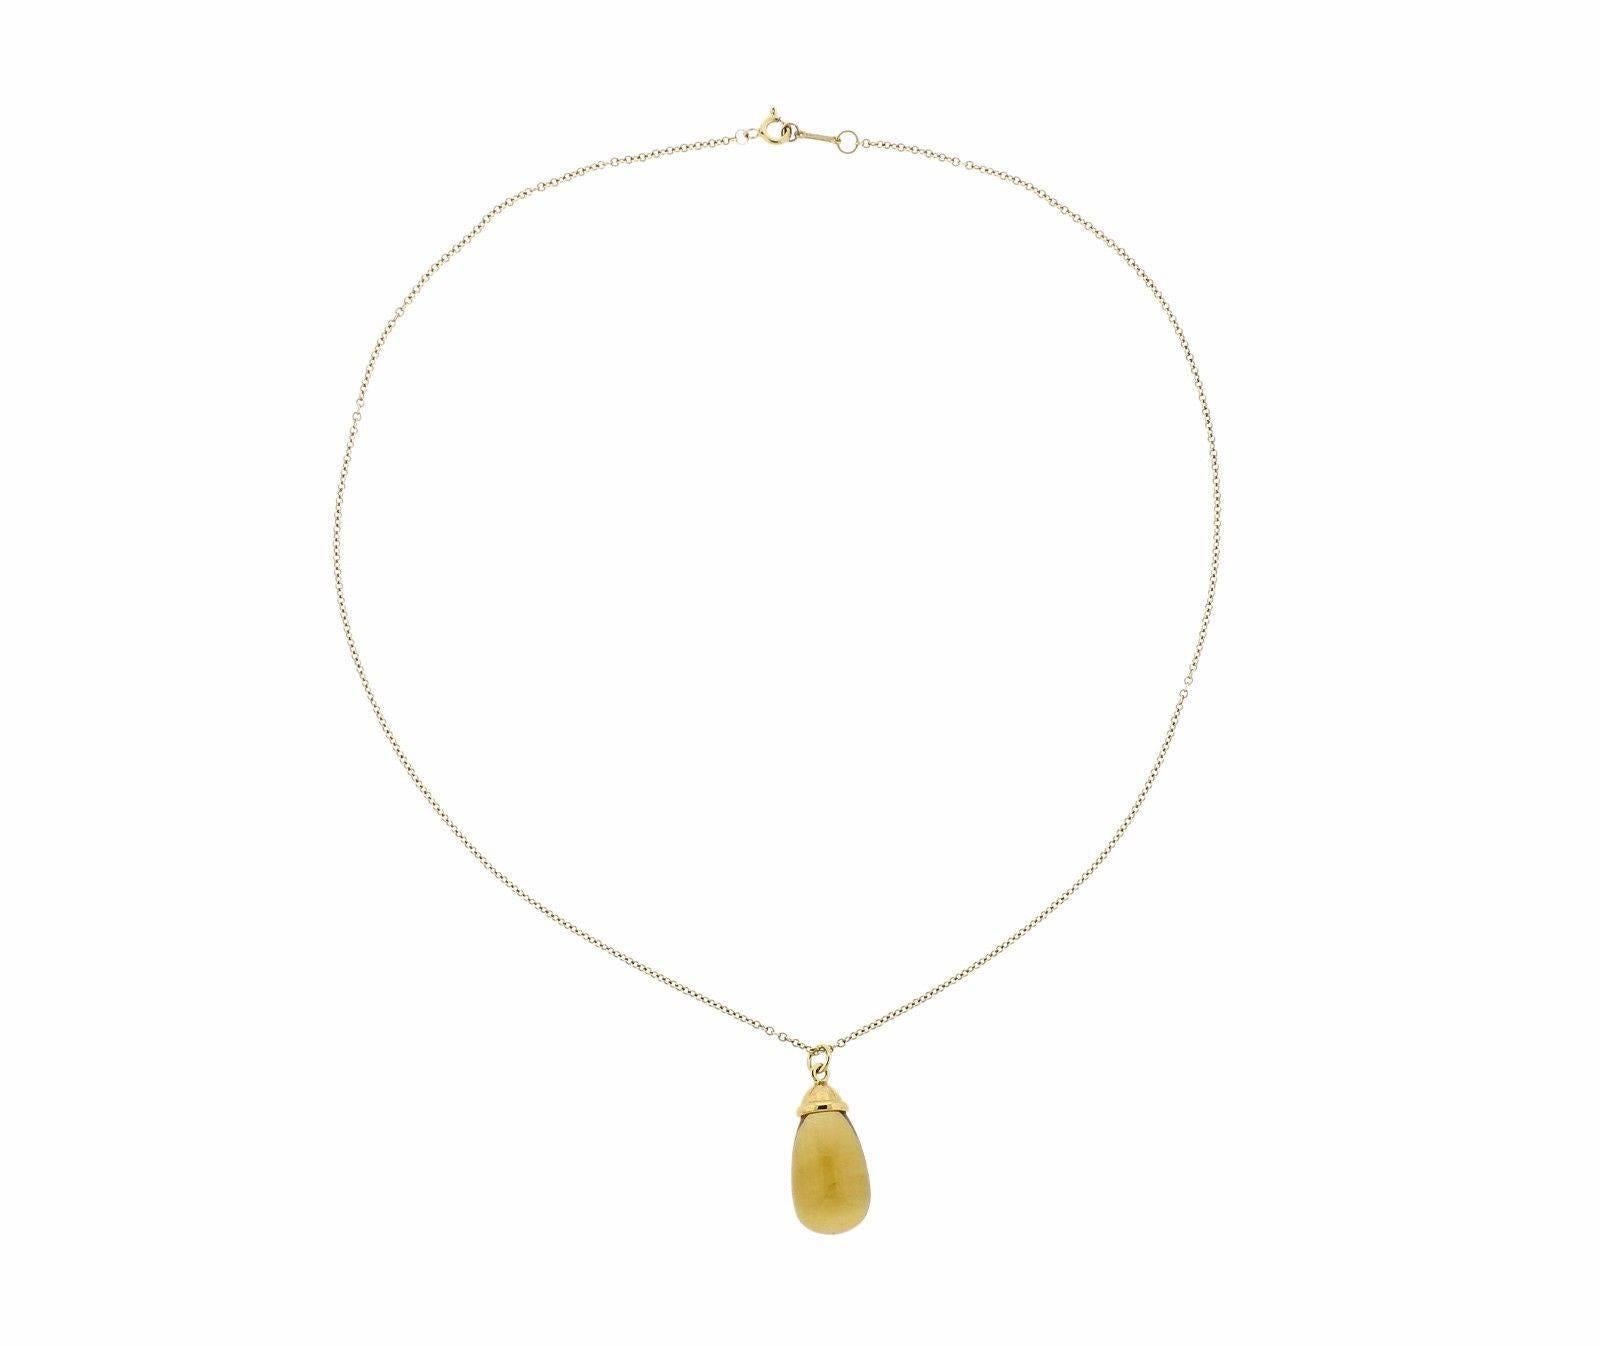 An 18k gold necklace set with a citrine (17.5mm x 12.5mm) pendant.  The necklace is 18" long and weighs 9 grams.  Marked: T & Co. 750 Paloma Picasso.